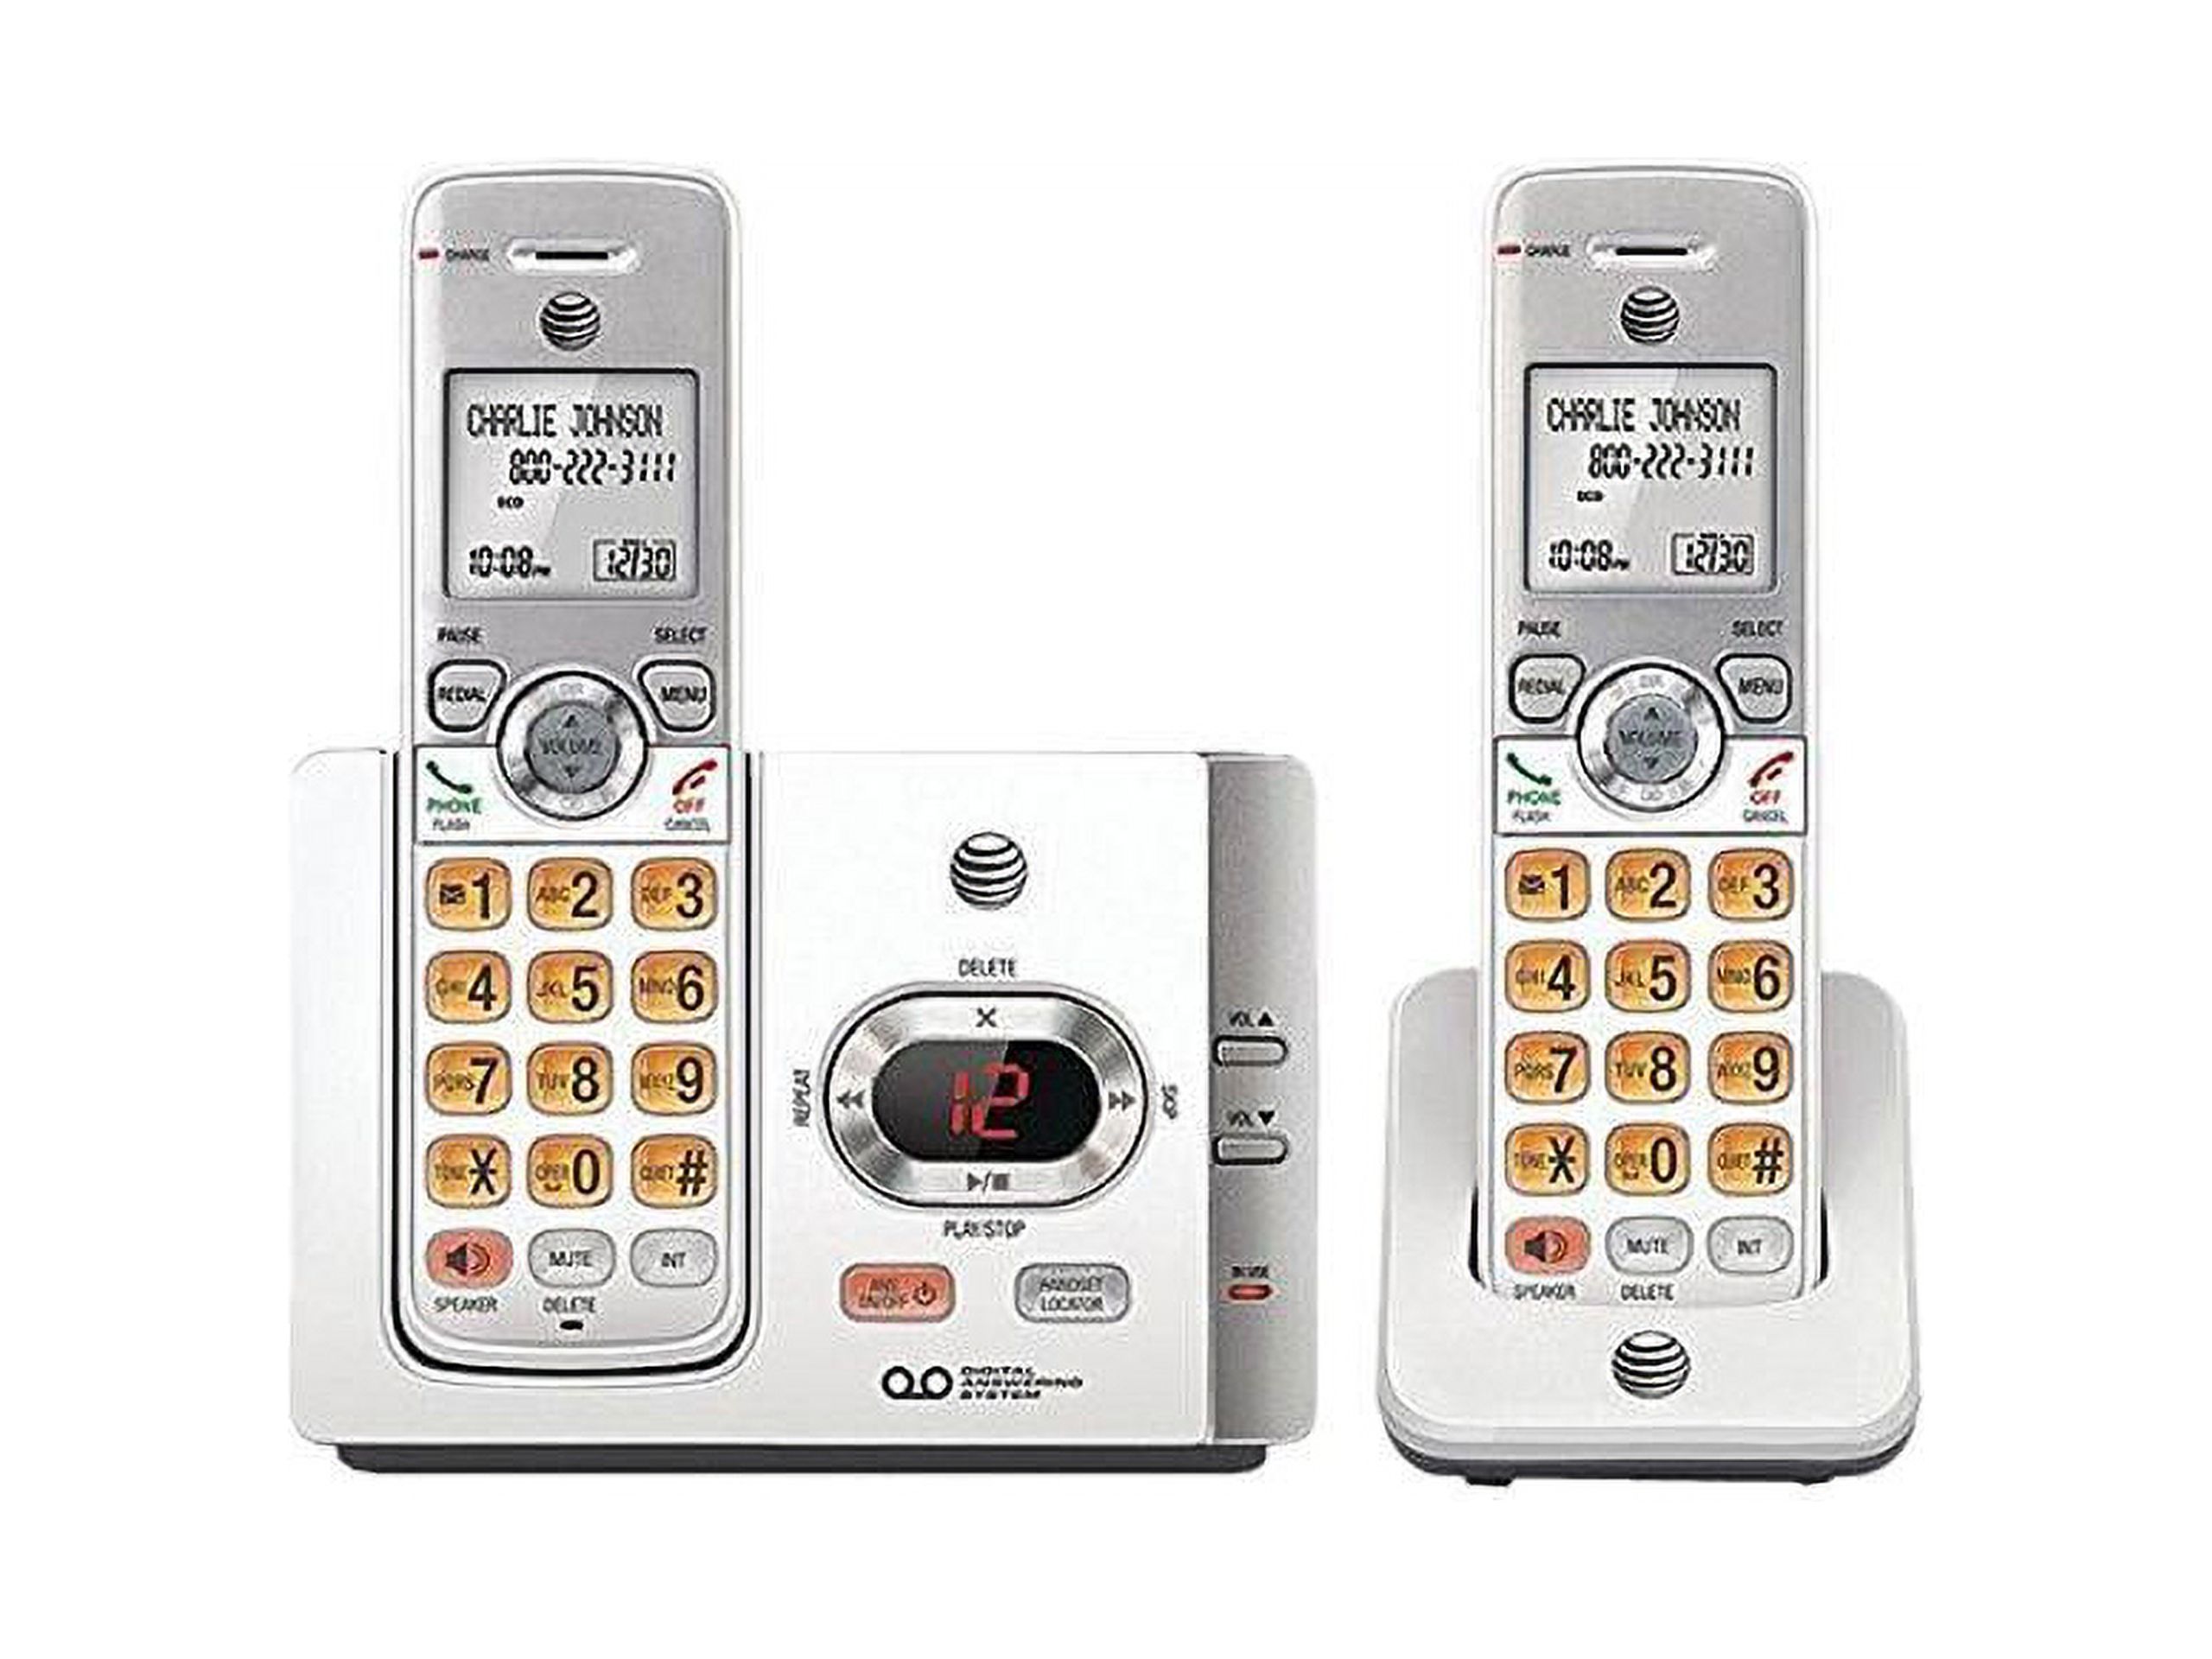 AT&T EL52215 DECT 6.0 Cordless Answering System with Caller ID/Call Waiting (2 Handsets) - image 1 of 6